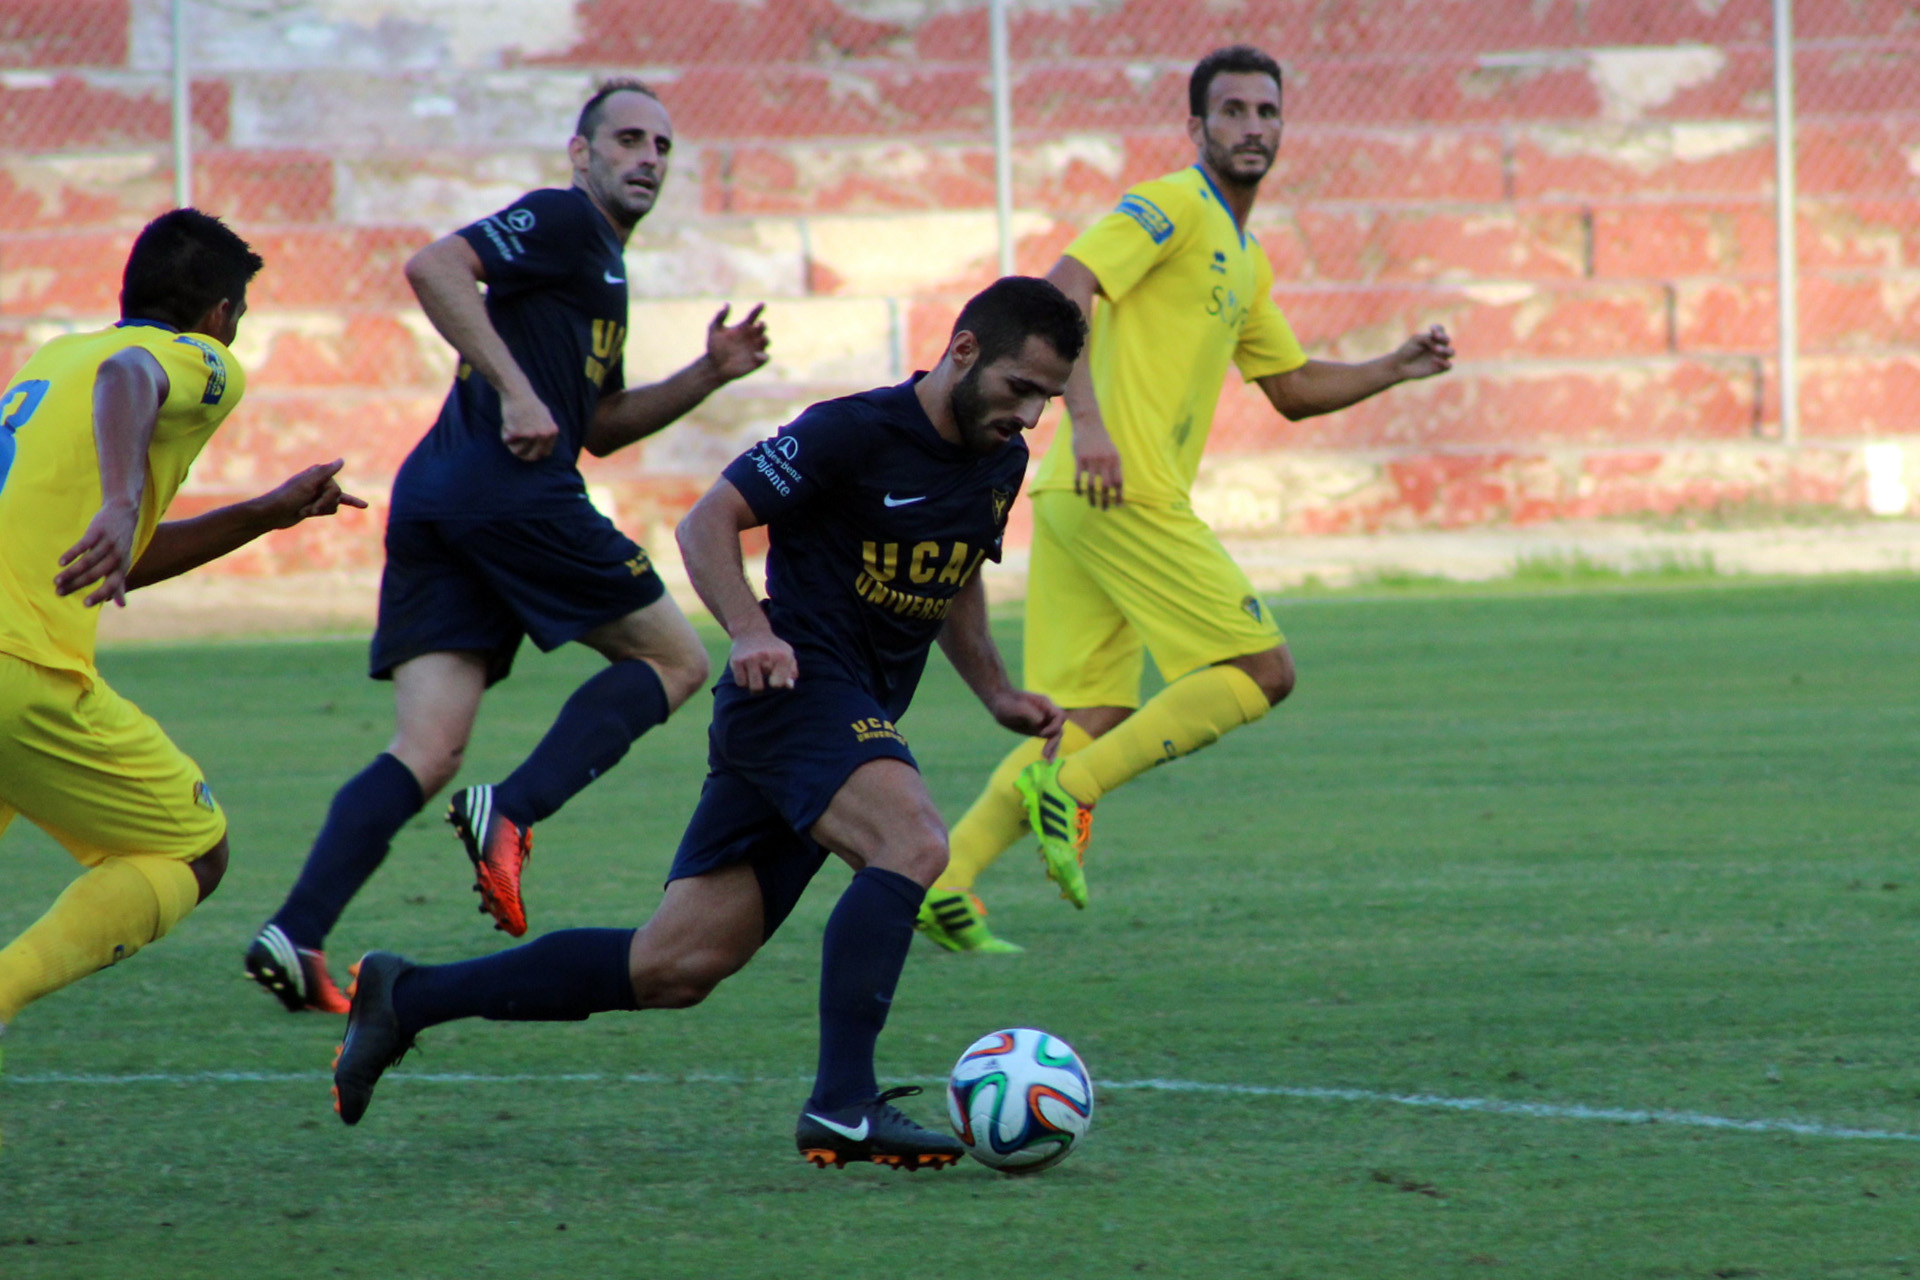 soccer players running for the ball in a game